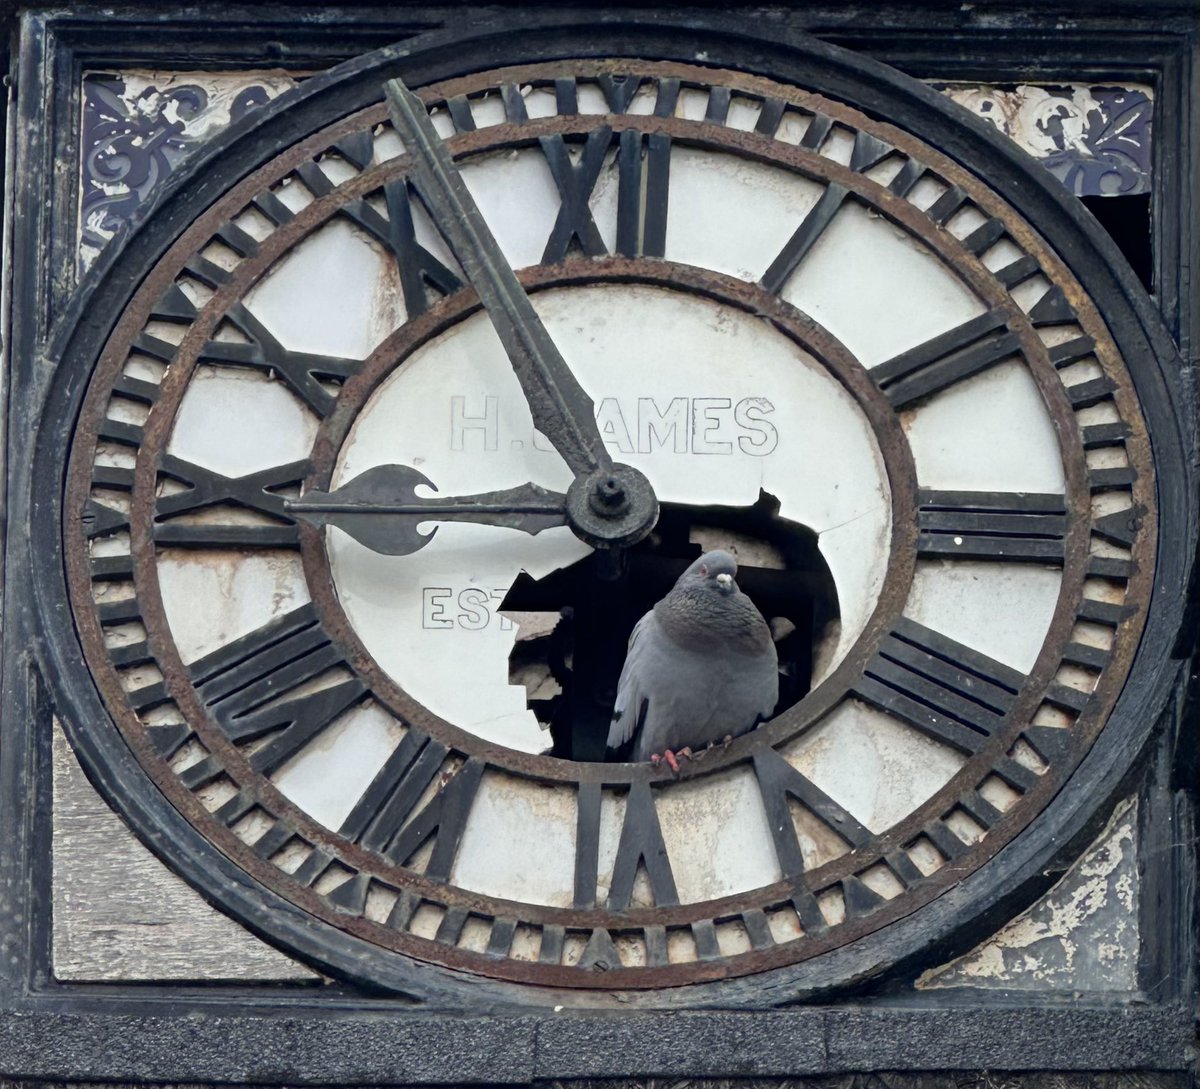 Even a stopped clock tells the right time twice a day… (Pic: my own).